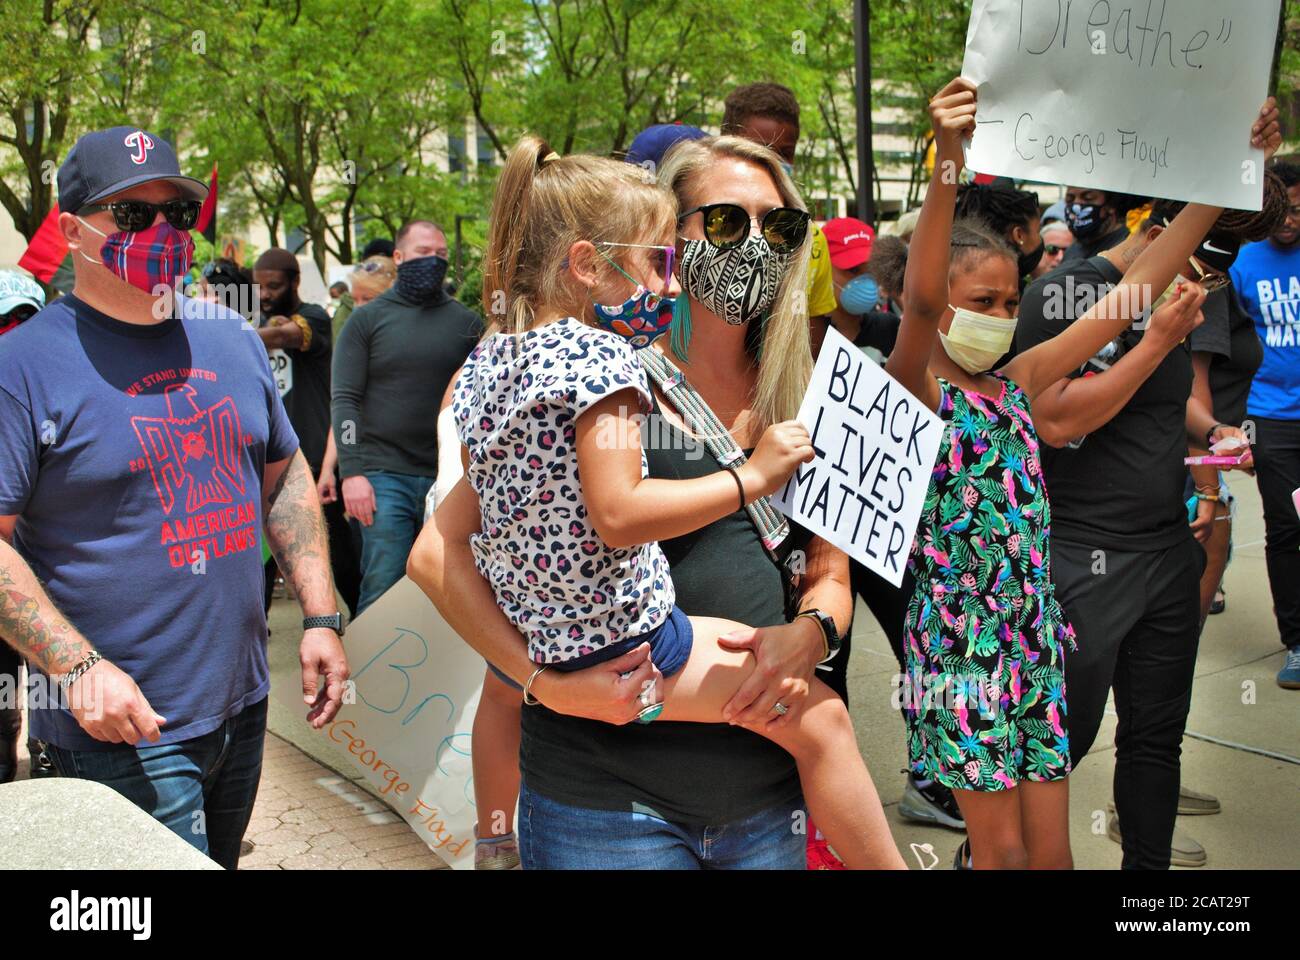 Dayton, Ohio, United States 05/30/2020 protesters at a black lives matter rally marching down the street holding signs and wearing masks Stock Photo